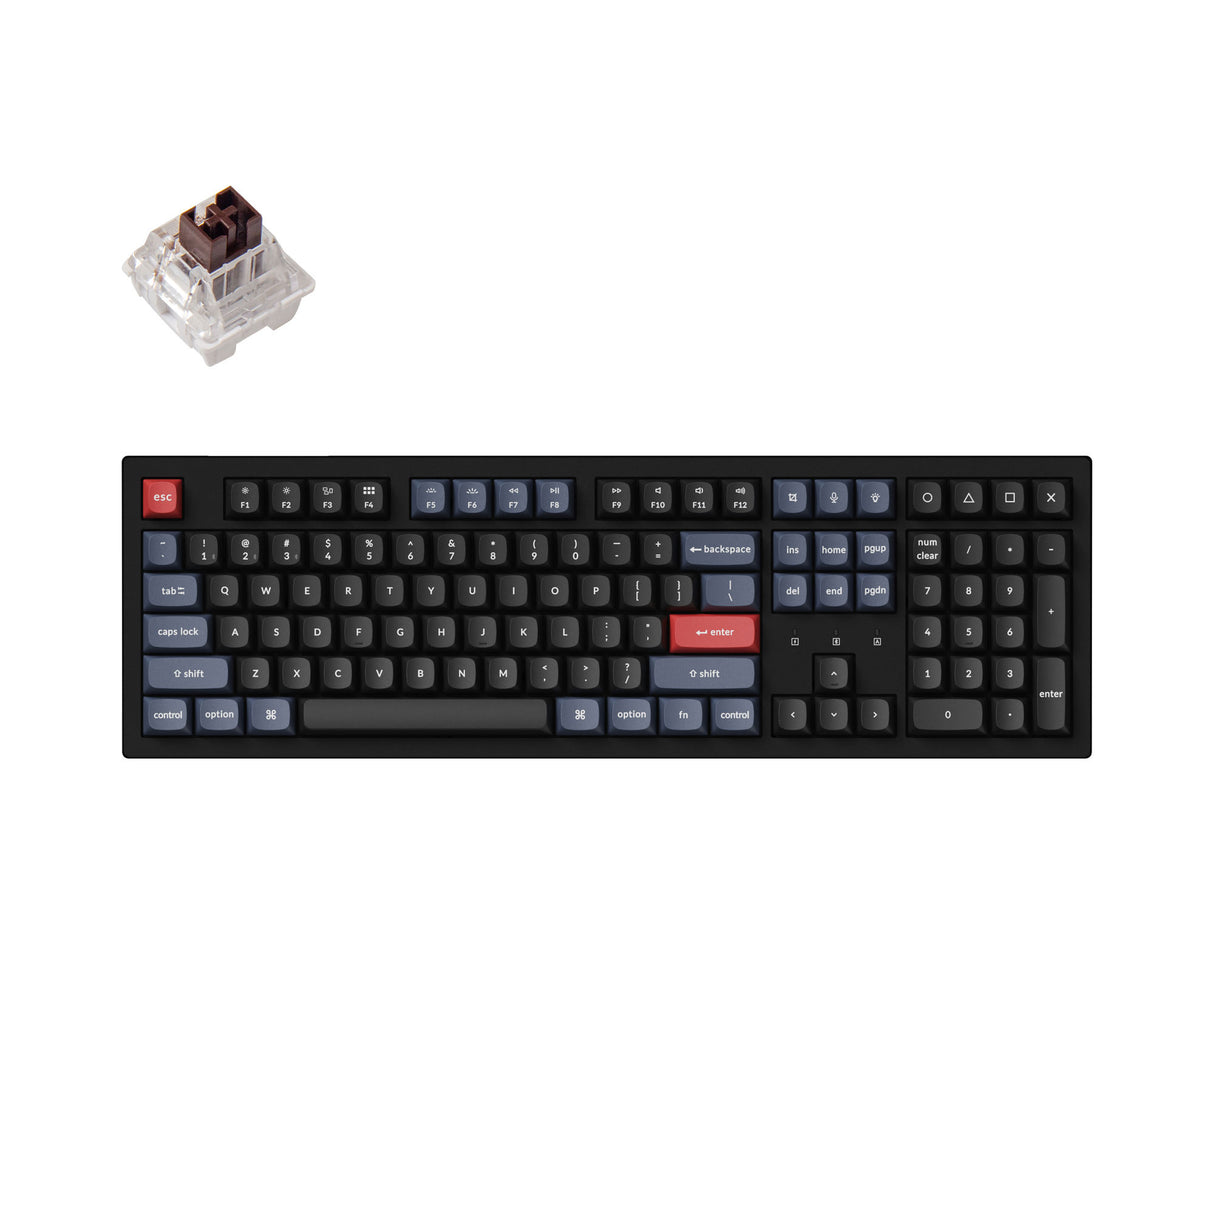 Keychron K10 Pro QMK VIA Wireless Custom Mechanical Keyboard Full Size for Mac Windows Linux hot-swappable with MX Switch White Backlight with Keychron K pro switch Brown